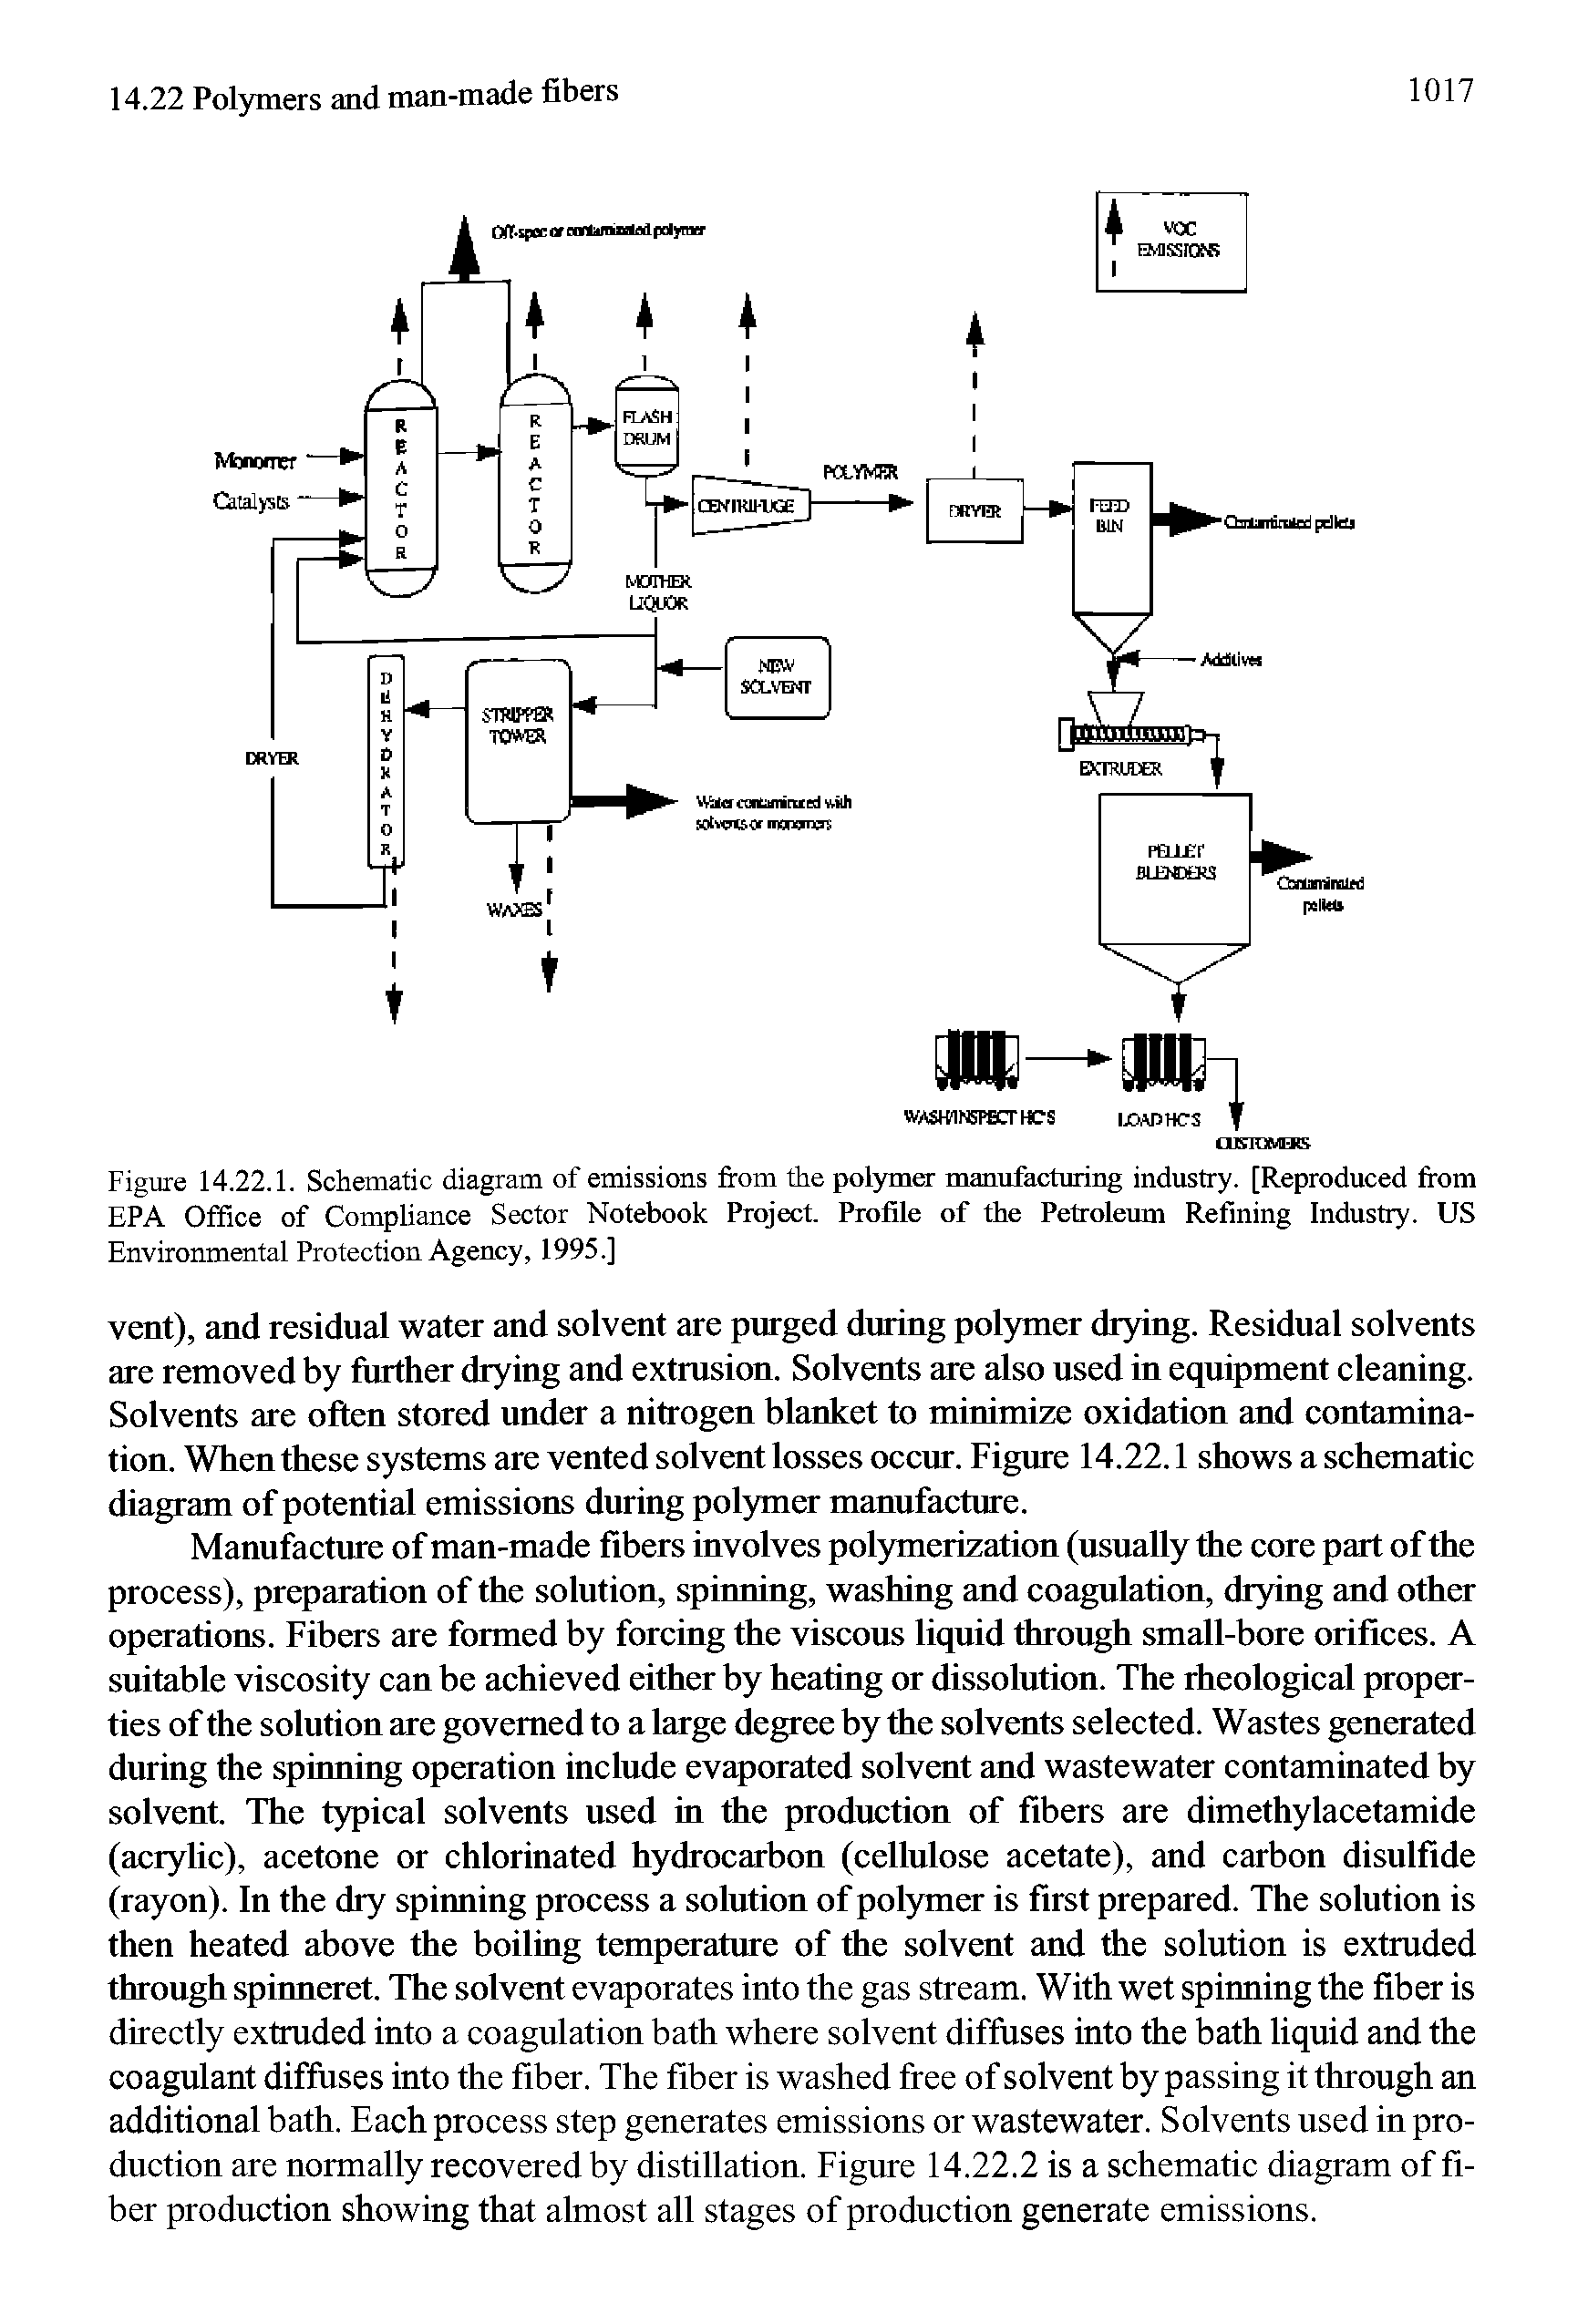 Figure 14.22.1. Schematic diagram of emissions from the polymer manufacturing industry. [Reproduced from EPA Office of Compliance Sector Notebook Project. Profile of the Petroleum Refining Industry. US Environmental Protection Agency, 1995.]...